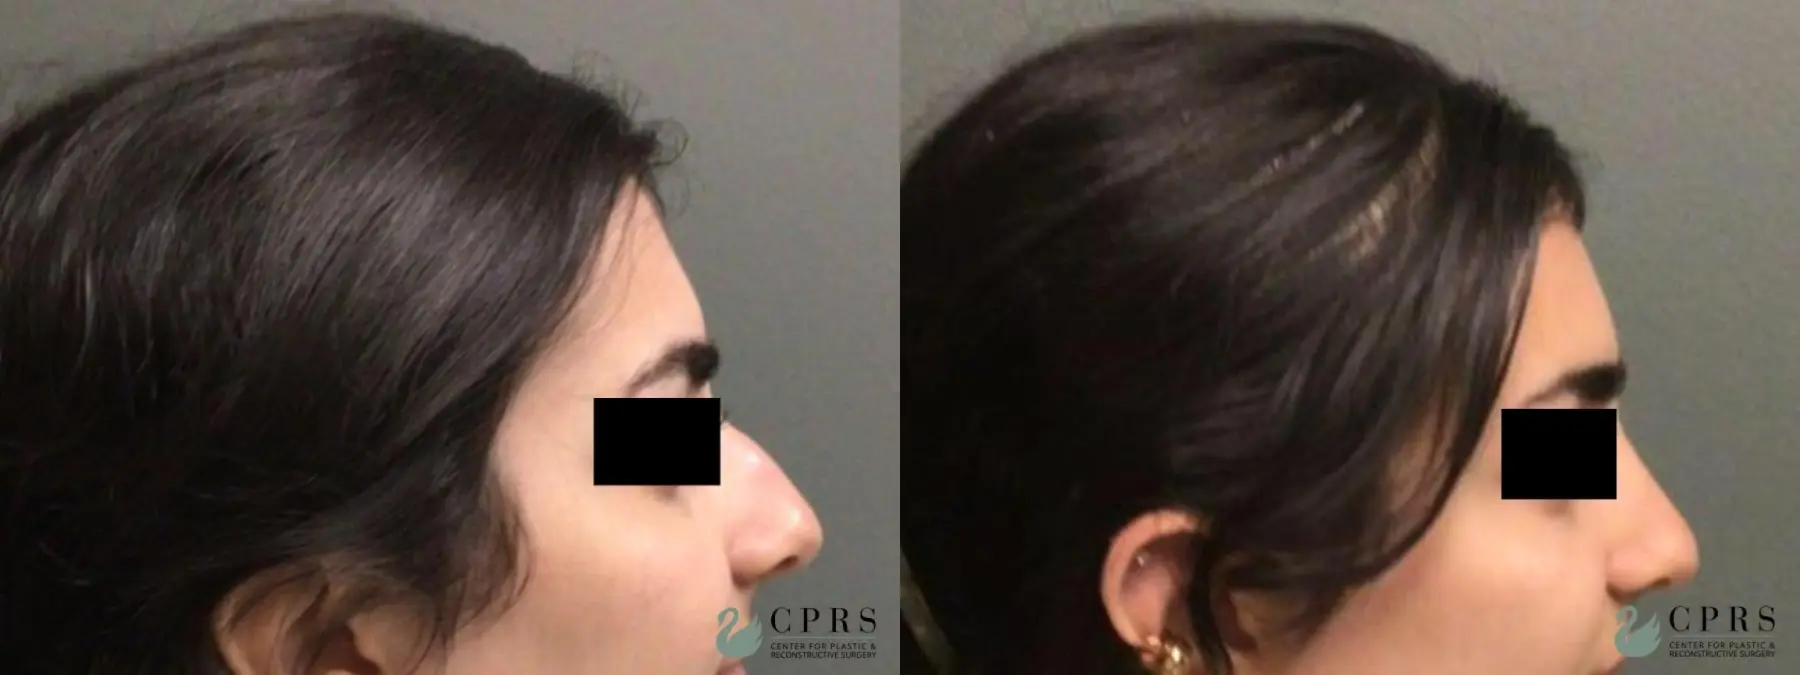 Rhinoplasty: Patient 15 - Before and After 1